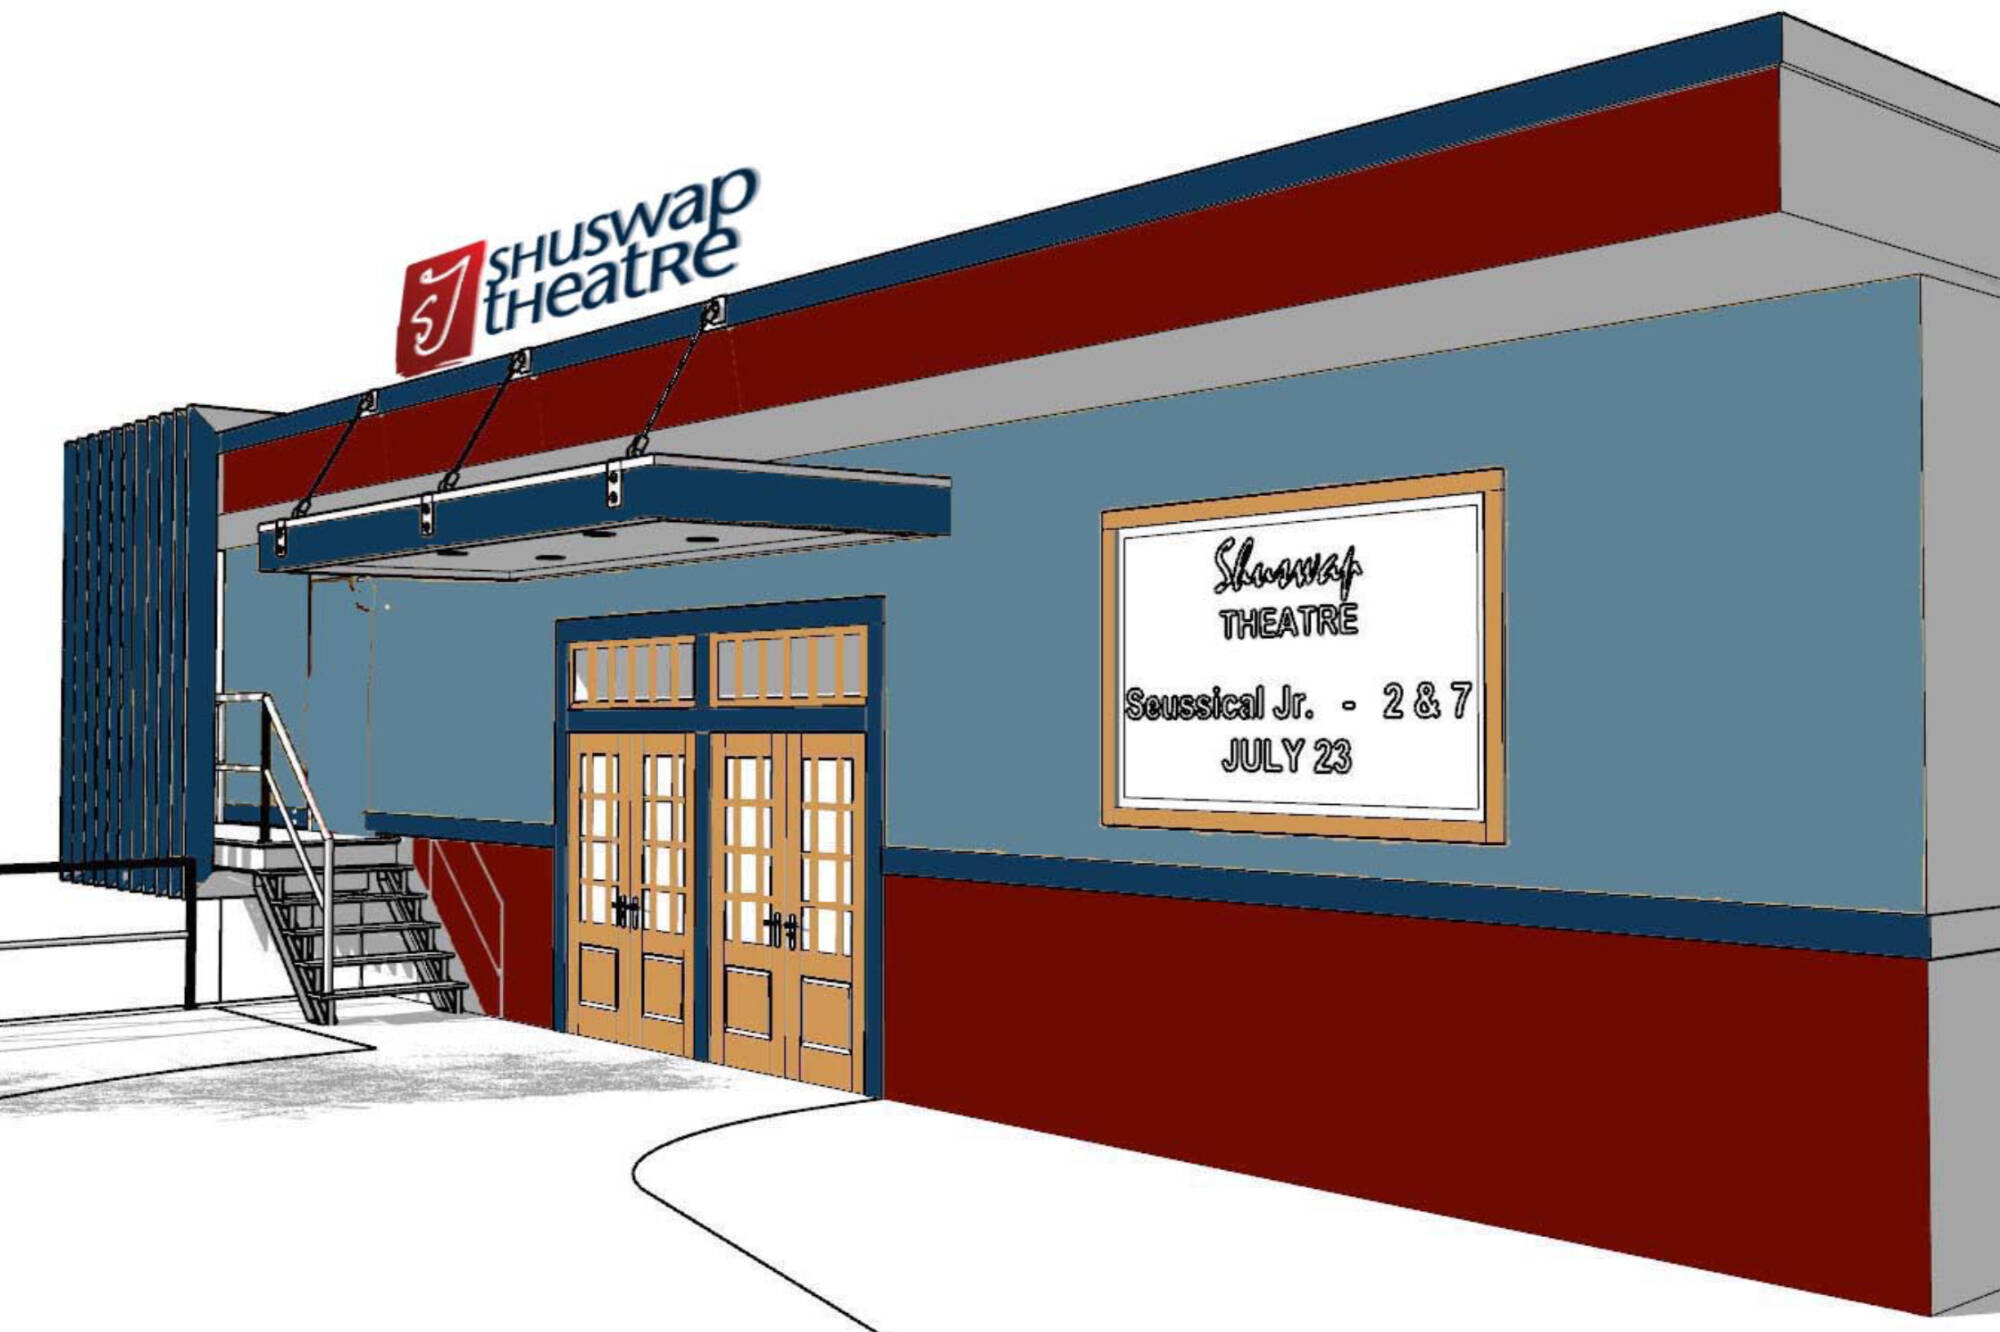 The Columbia Shuswap Regional District board recently approved $2,000 in grant-in-aid funding for the Shuswap Theatre Society, to go towards Operation Facelift, a renovation project for the front of the theatre building at 41 Hudson Ave. in Salmon Arm. (Shuswap Theatre image)